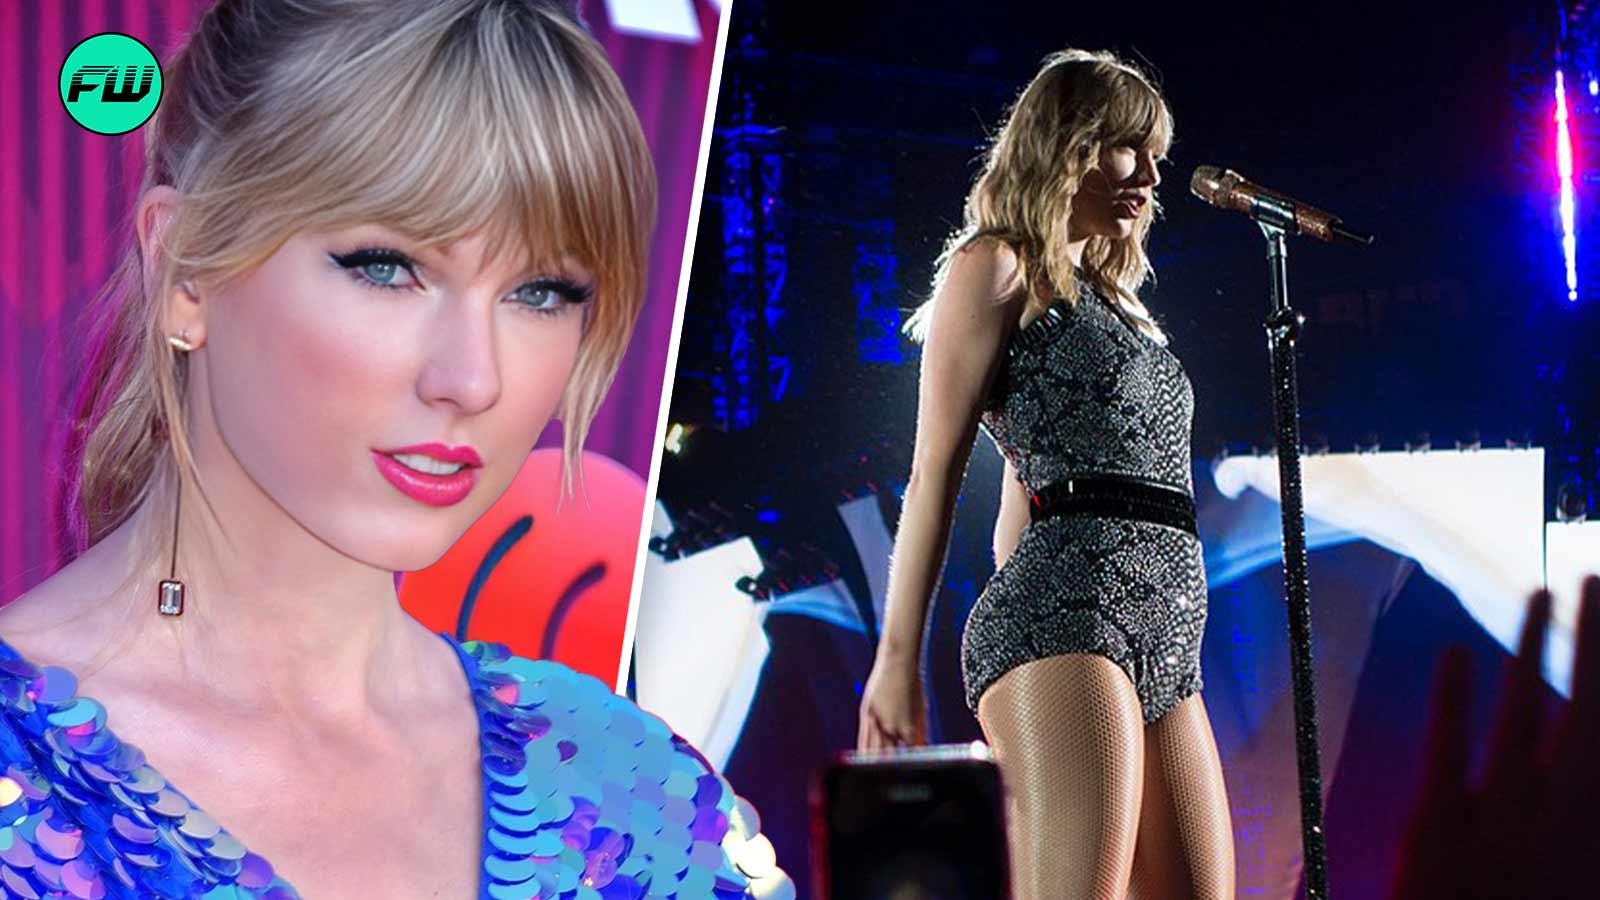 Taylor Swift may have a superpower as she can spot cameras out of nowhere